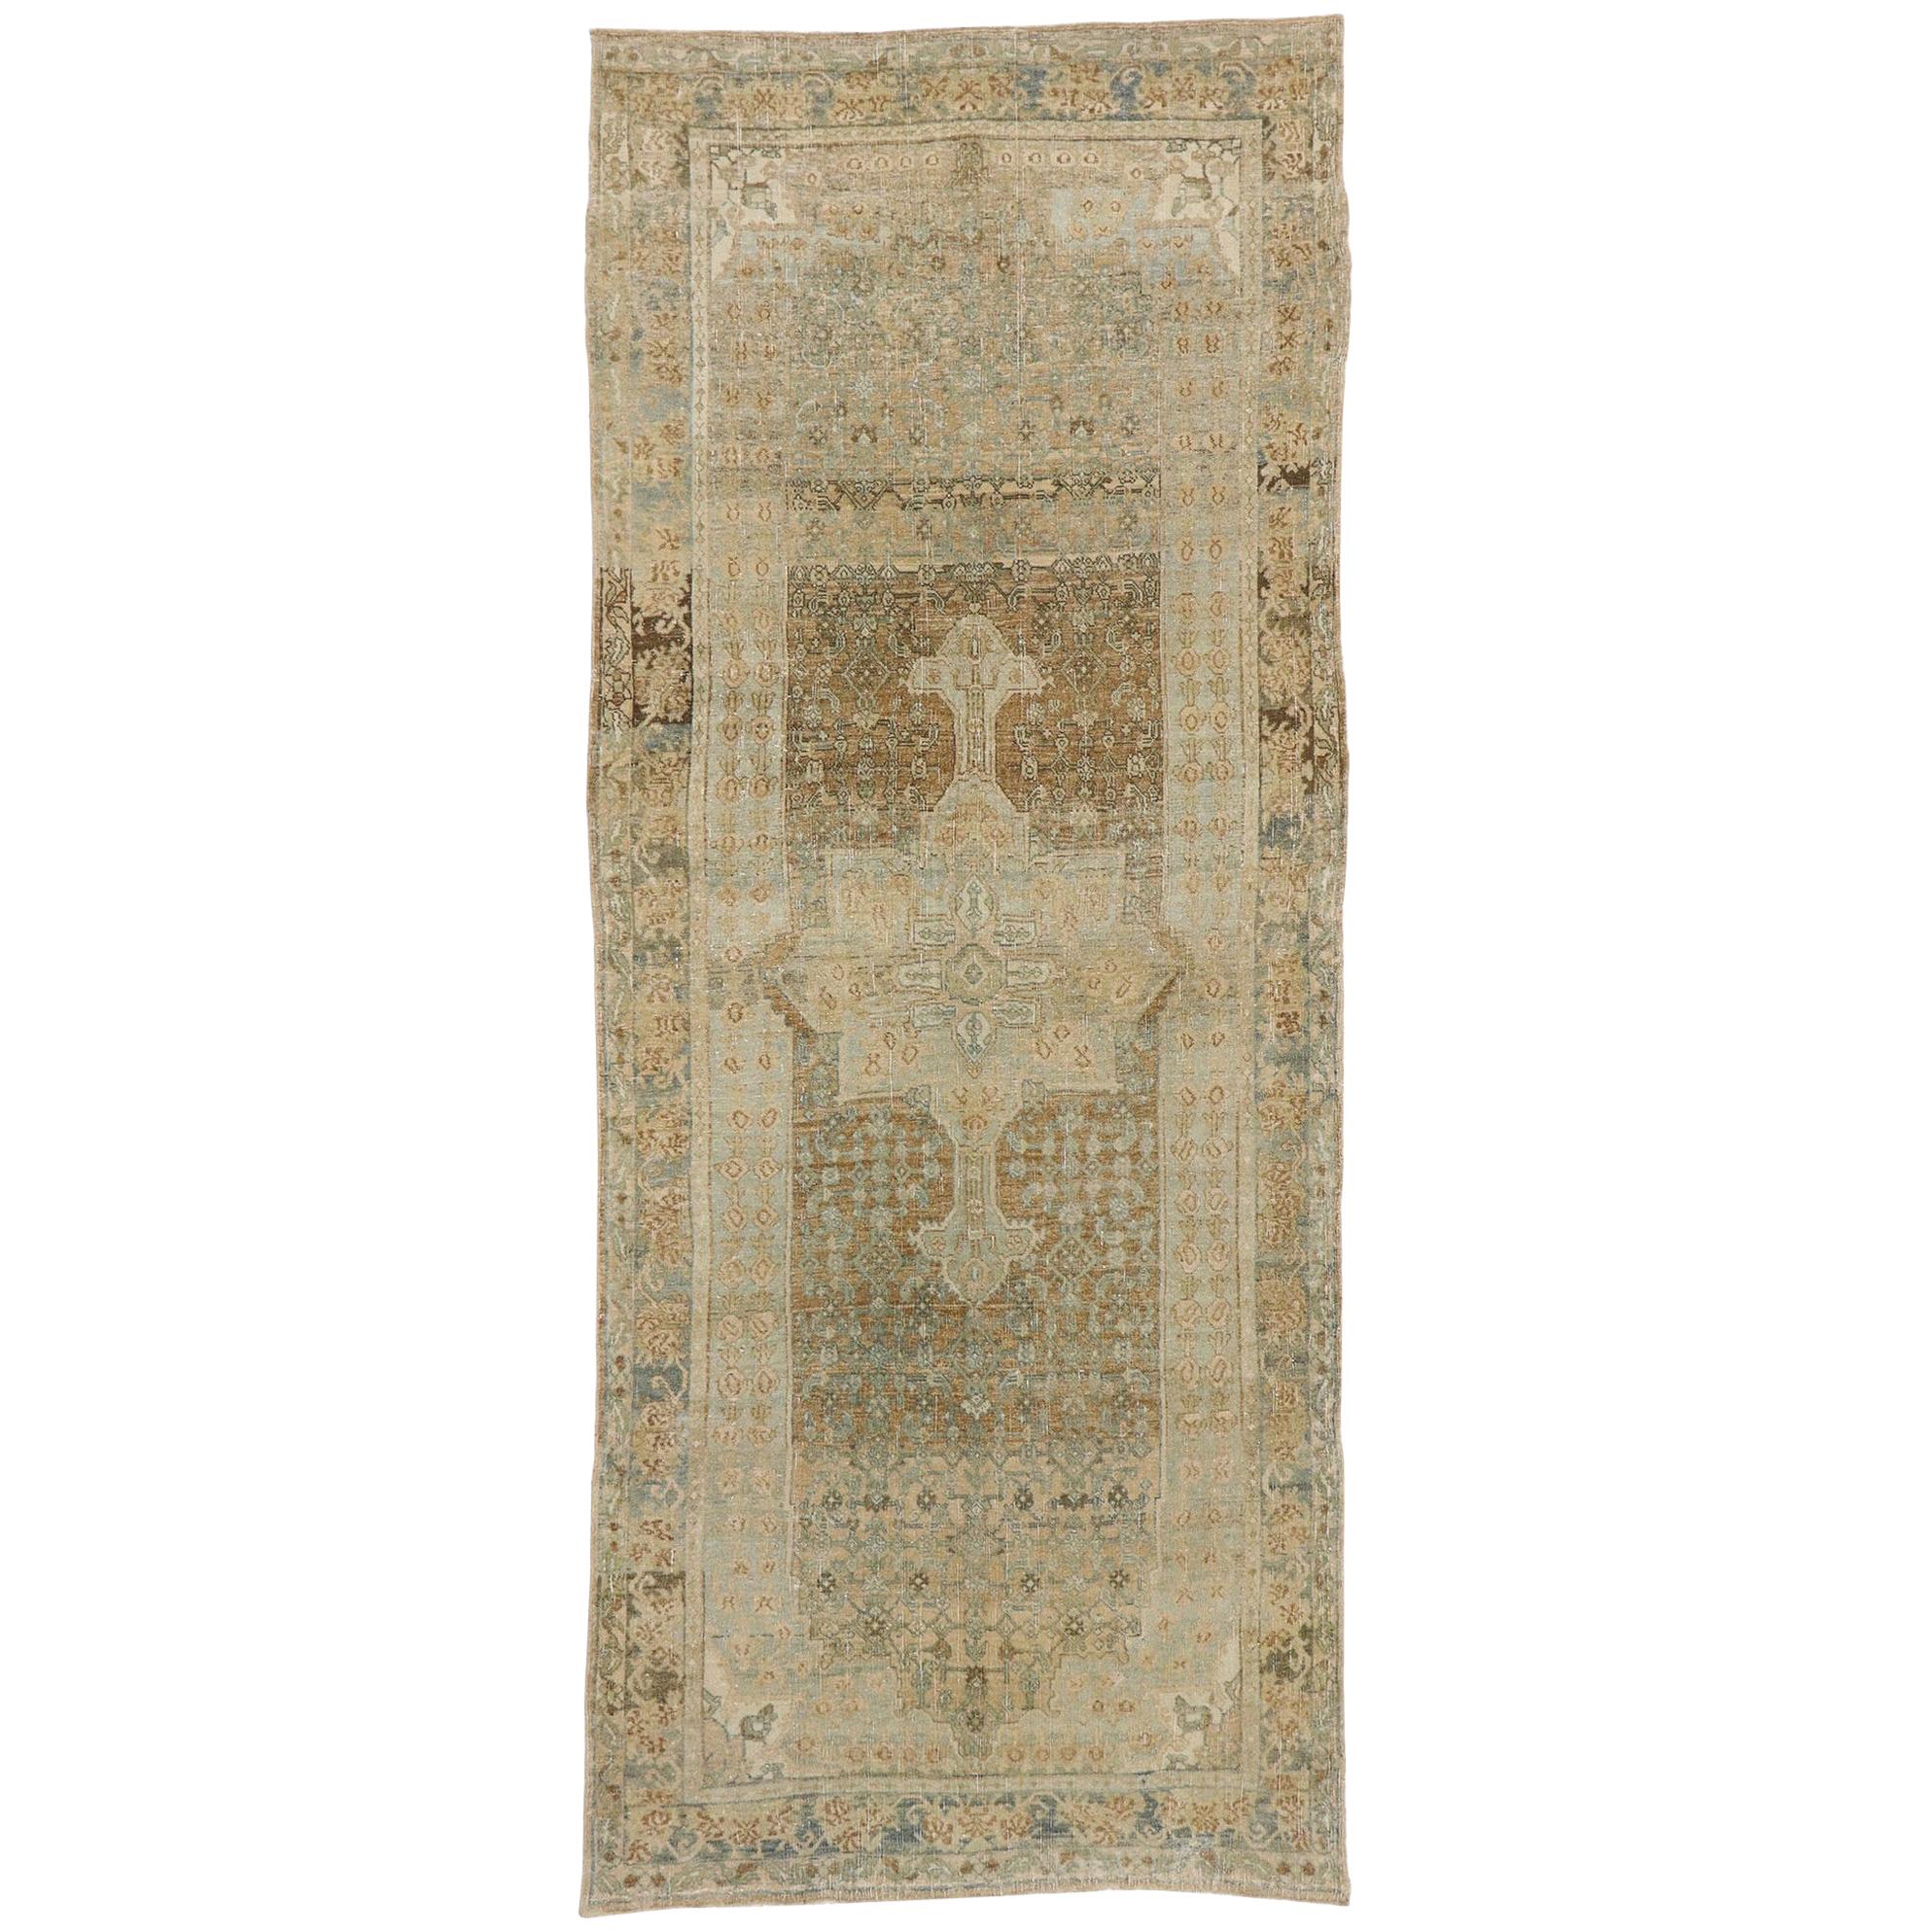 Distressed Antique Persian Bijar Runner with Modern Rustic Shaker Style